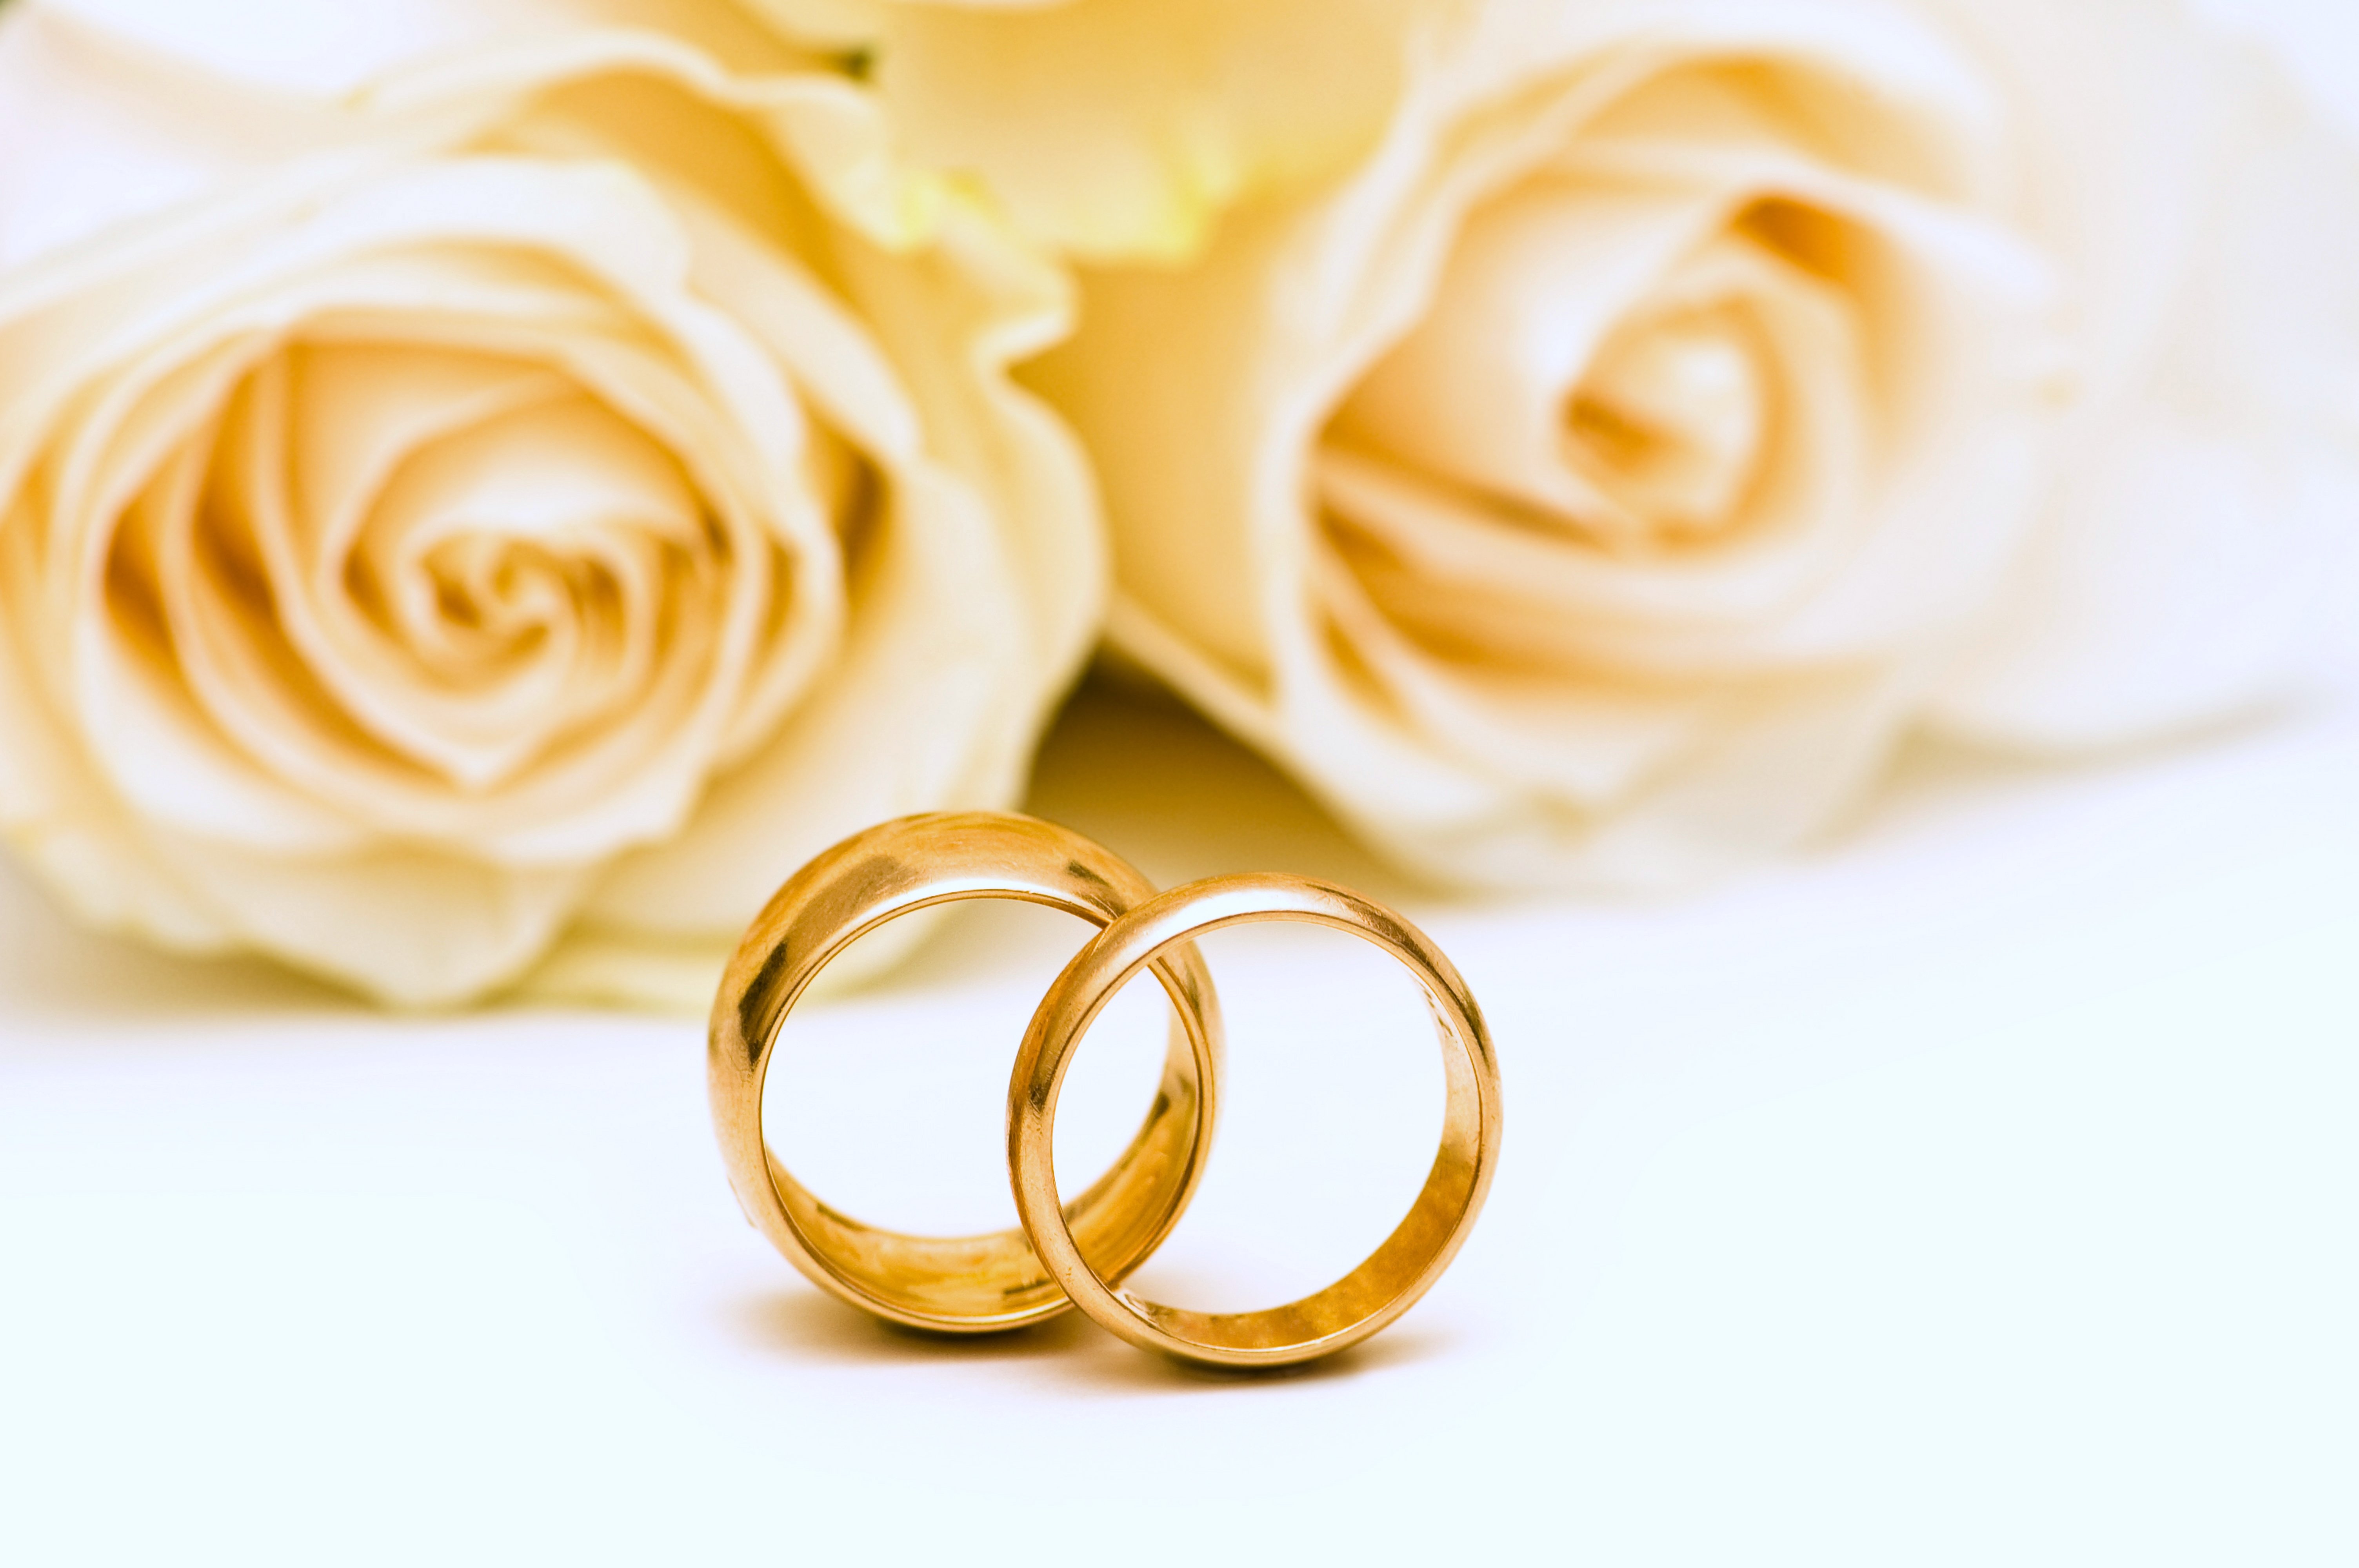 wedding, Rings, Roses, Flowers, Gold, Lovers, Yellow, Romance, Emotions, Marriage, Couple, Girls Wallpaper